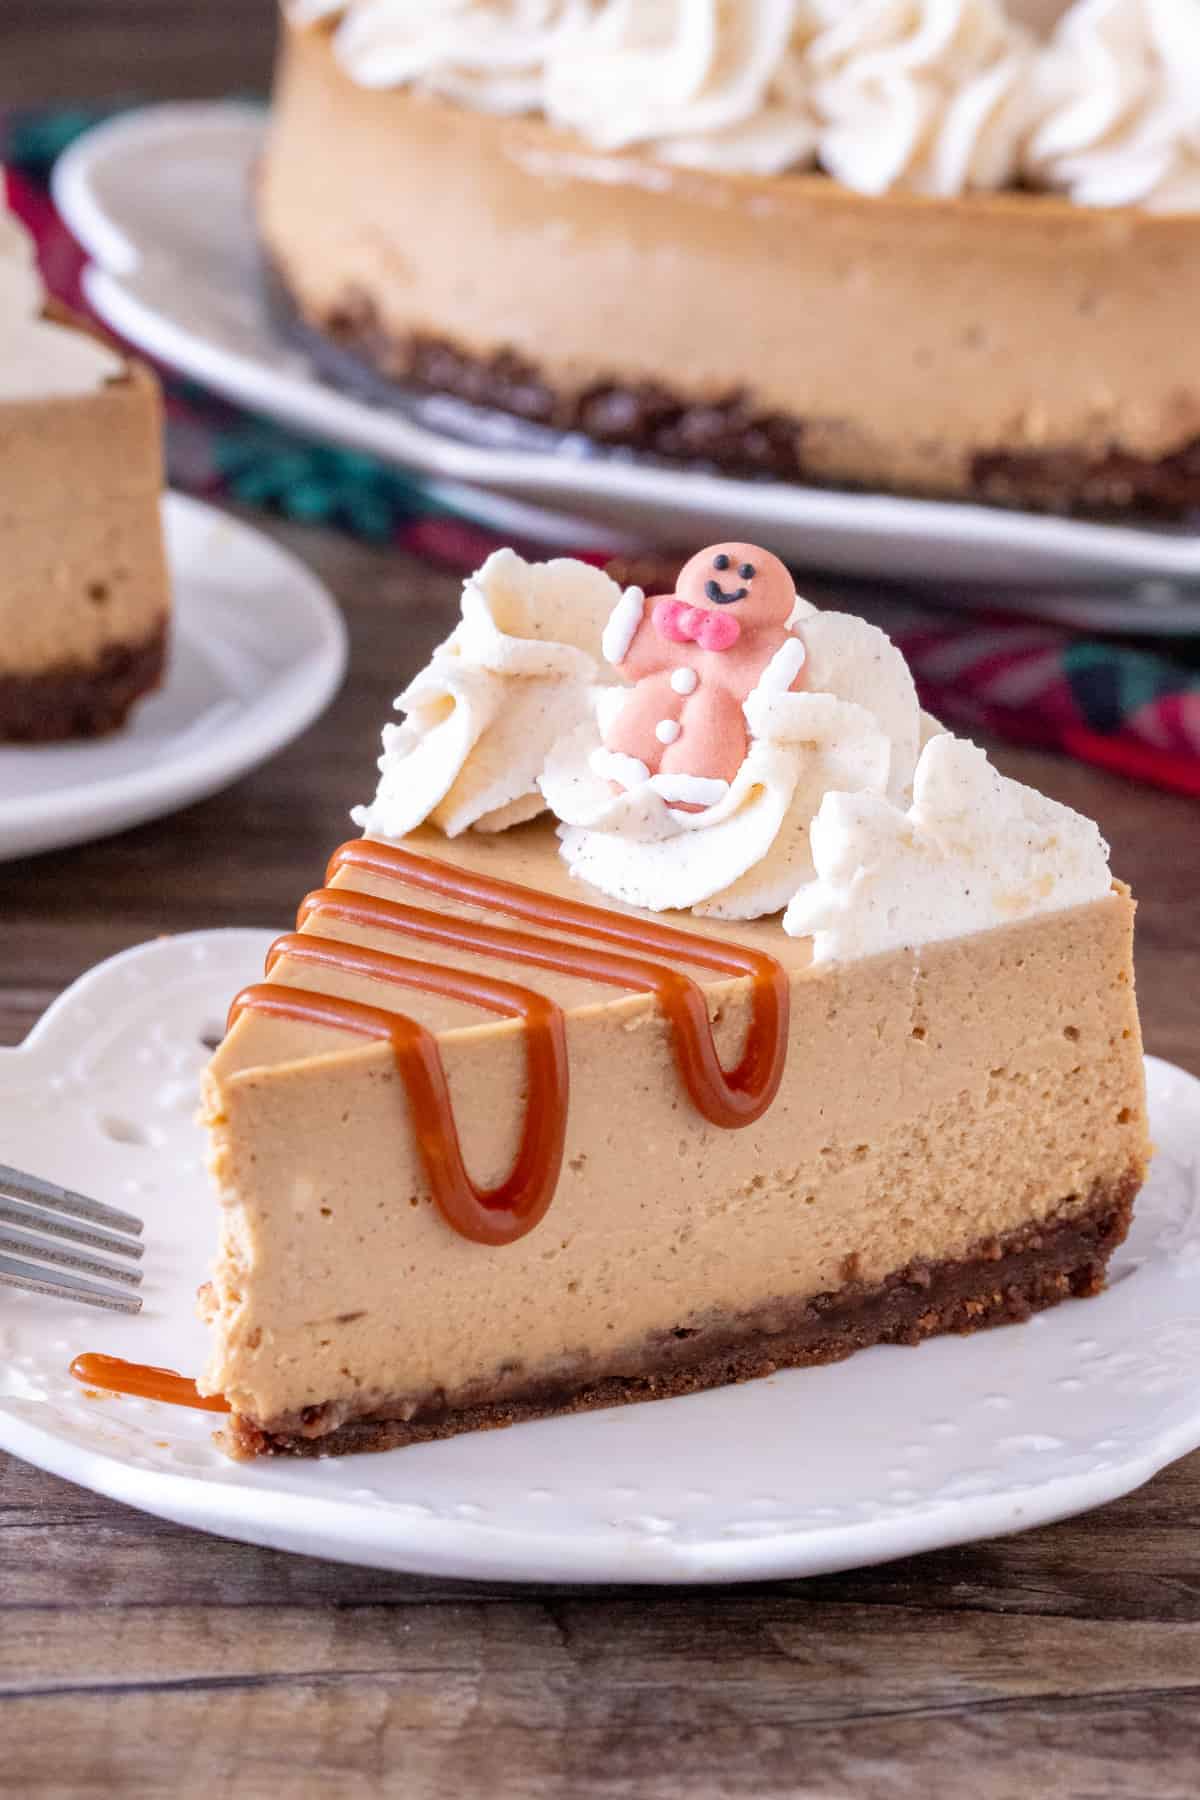 Slice of gingerbread cheesecake with caramel sauce.